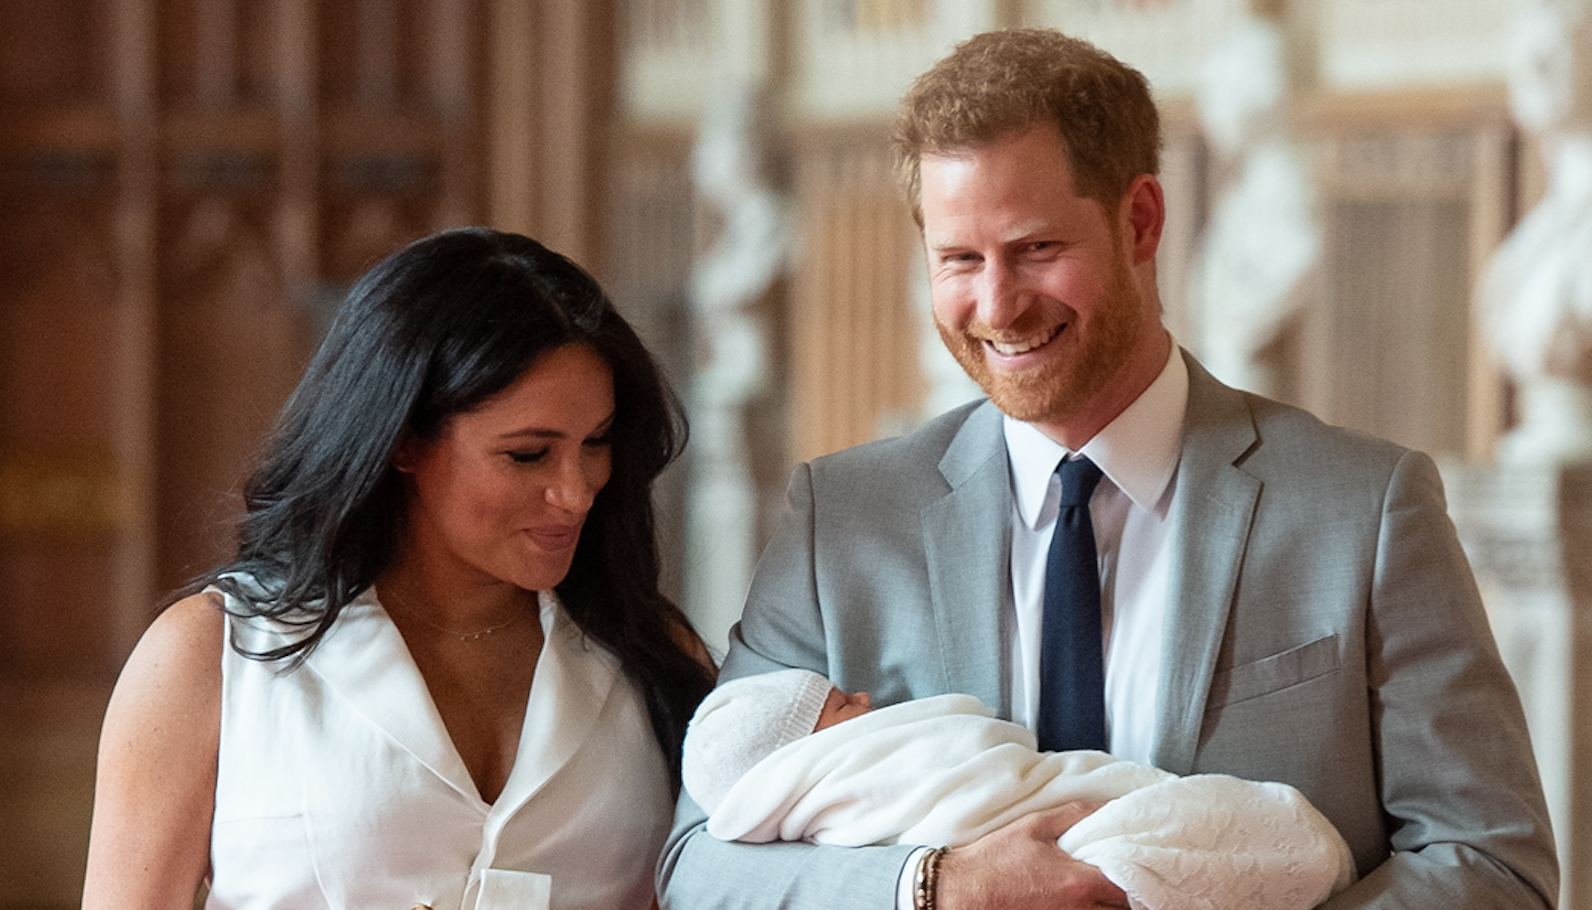 Meghan Markle gives comforting smile to Princess Charlotte as they